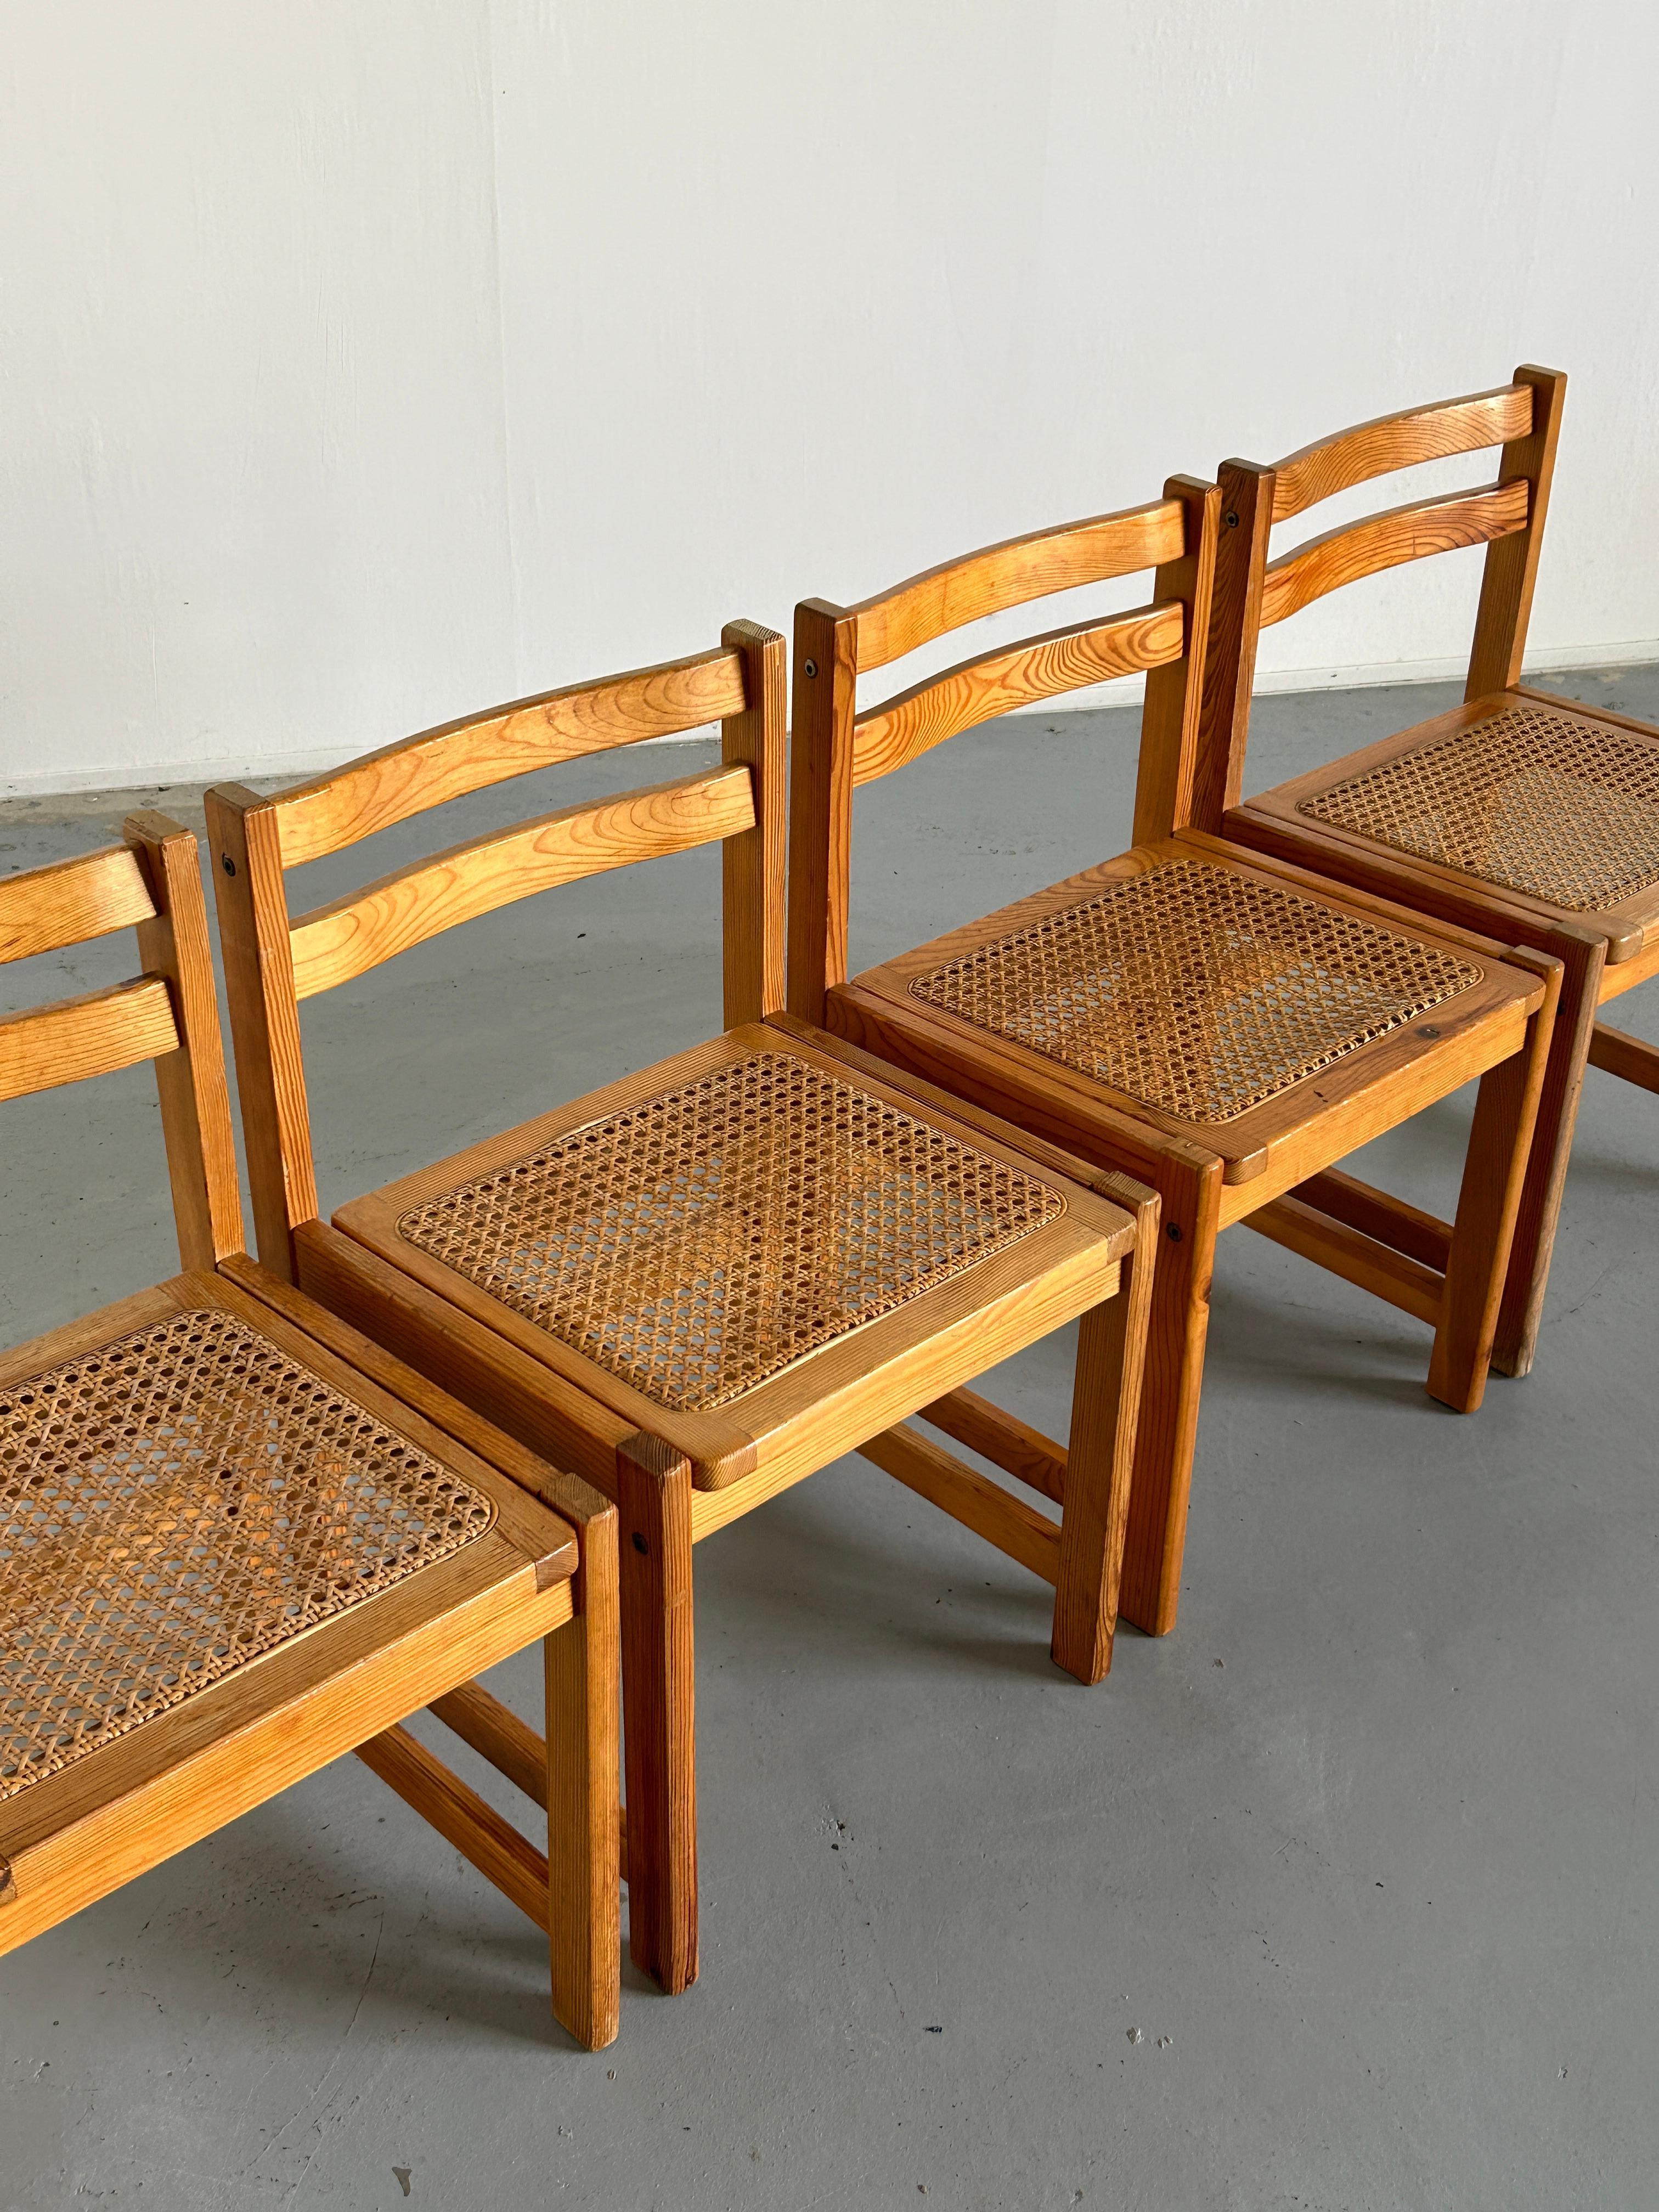 Set of 4 Vintage Mid-Century Modern Wooden Dining Chairs in Beech and Cane, 60s 6